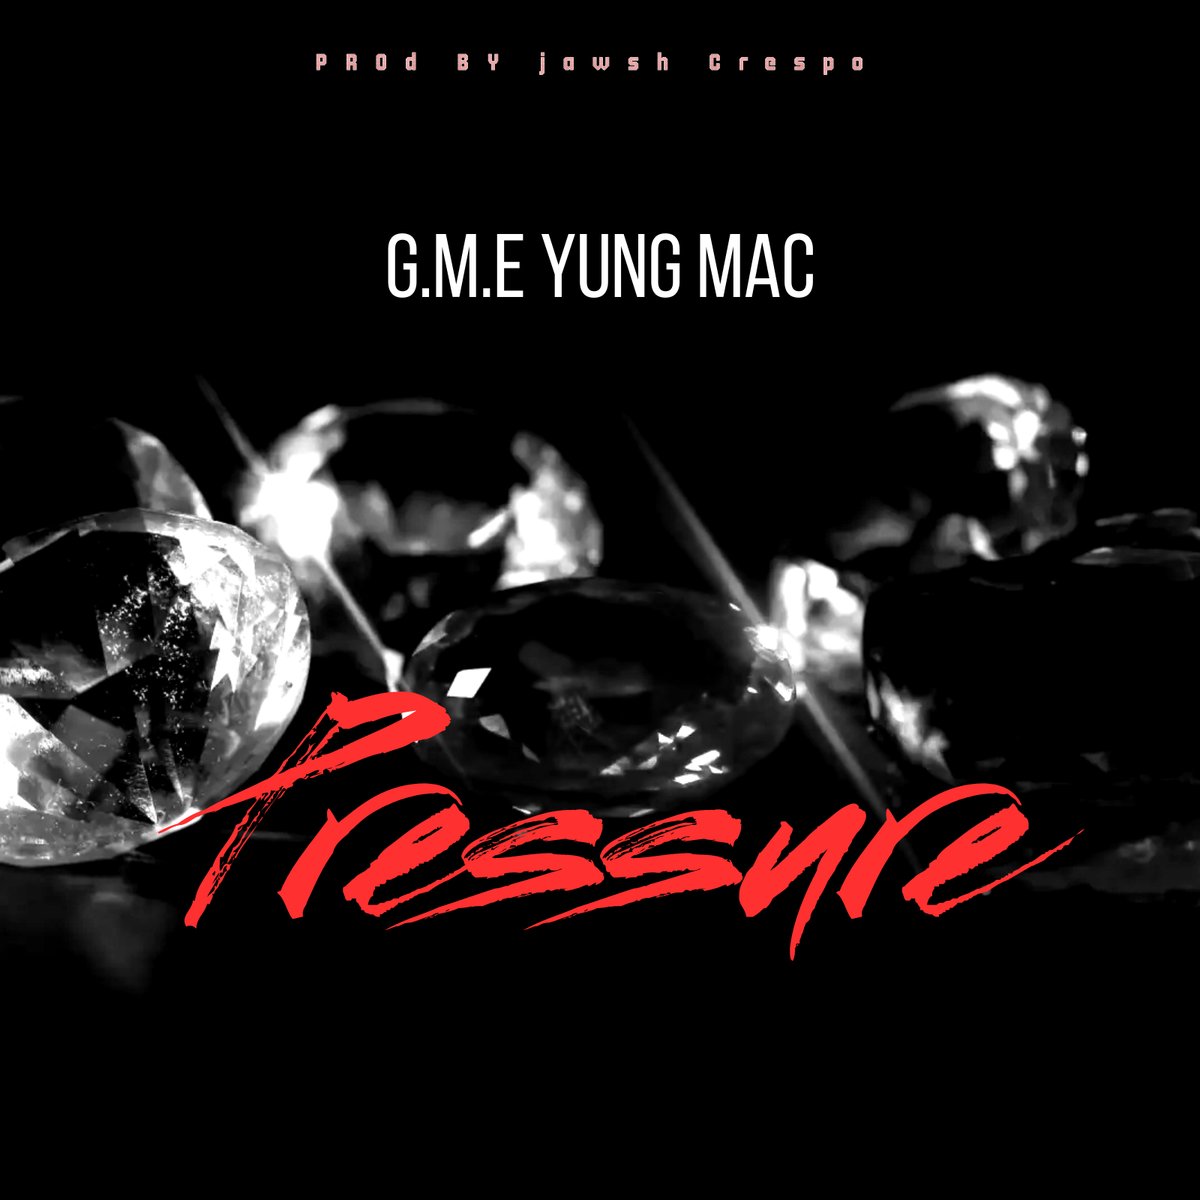 NEW MUSIC!! 🎶🔥🔥
'Pressure' 
Prod by @JAWSHCRESPO_ 
Coming Soon #NewSingle 
s/o to @SinedroneS 🫡